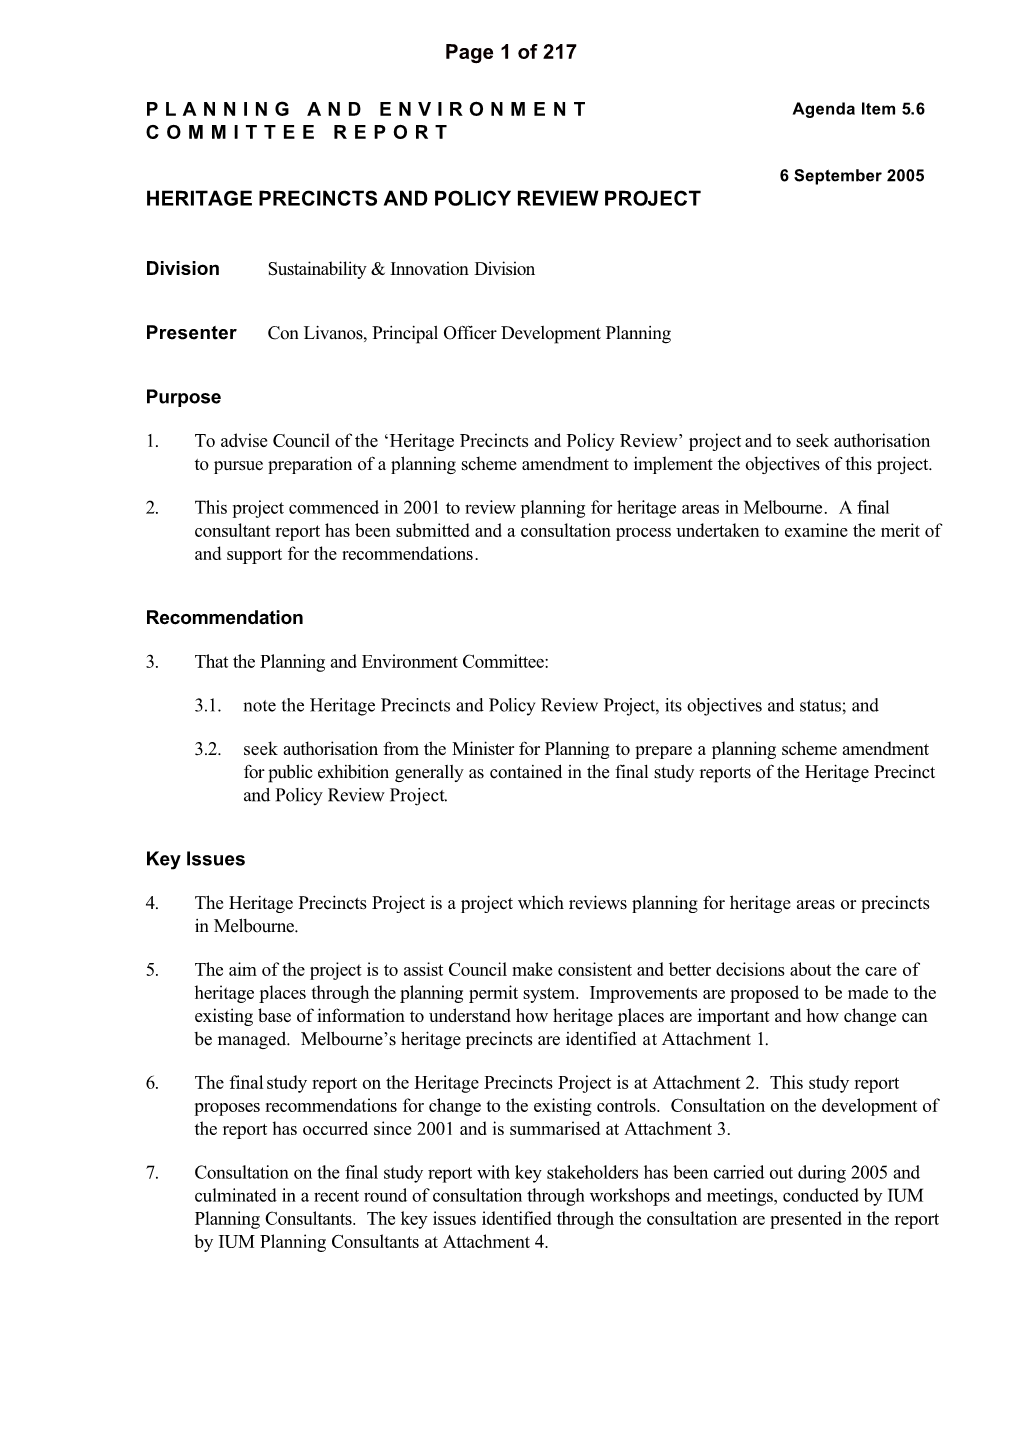 HERITAGE PRECINCTS and POLICY REVIEW PROJECT Page 1